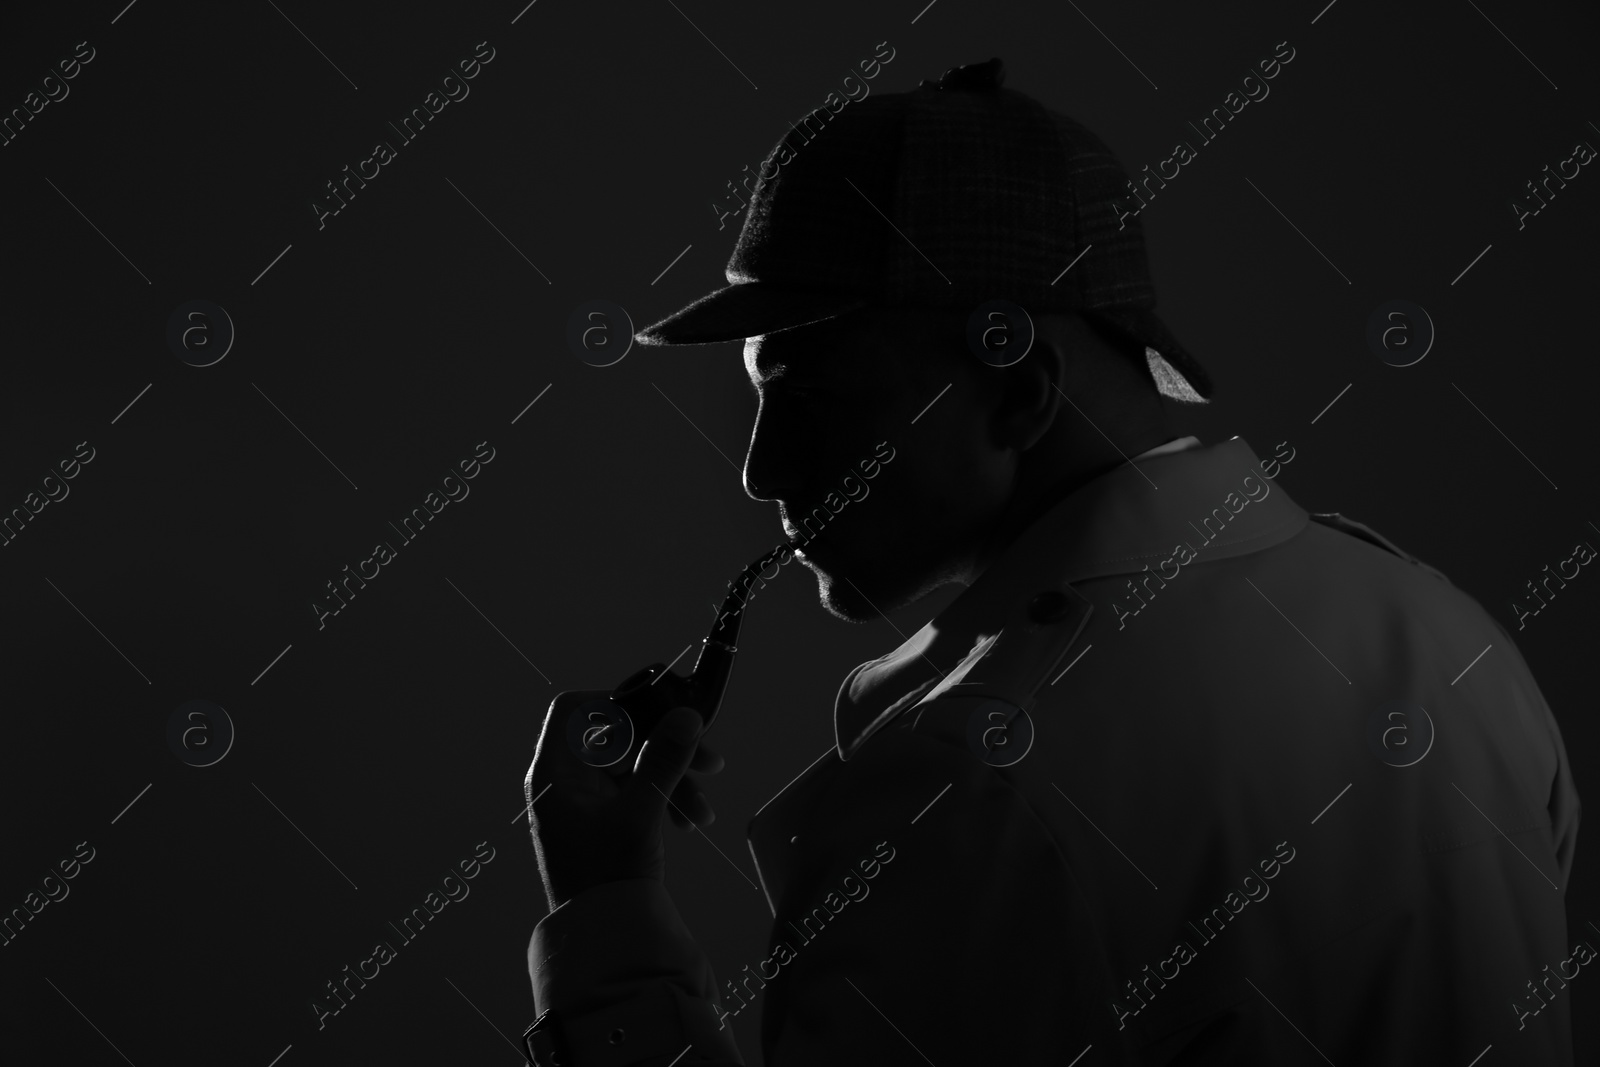 Photo of Old fashioned detective with smoking pipe on dark background, black and white effect